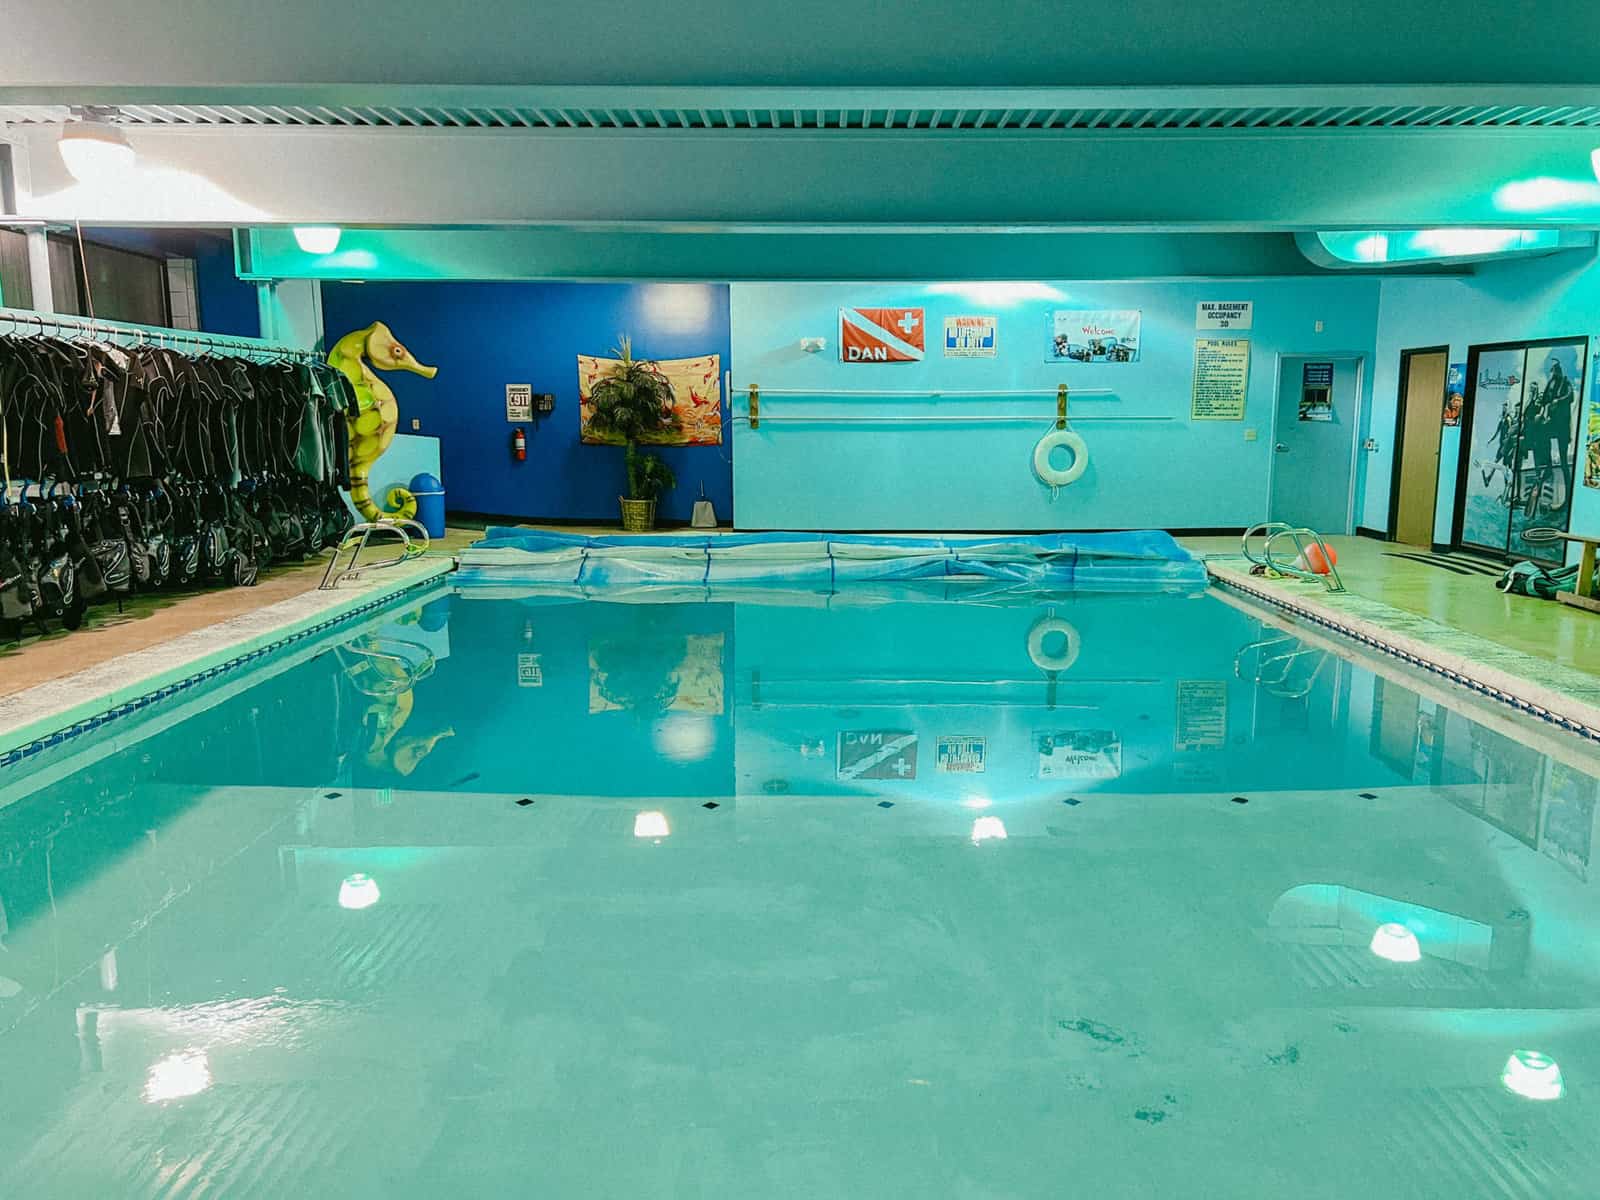 The pool at the dive shop where you learn to scuba dive.